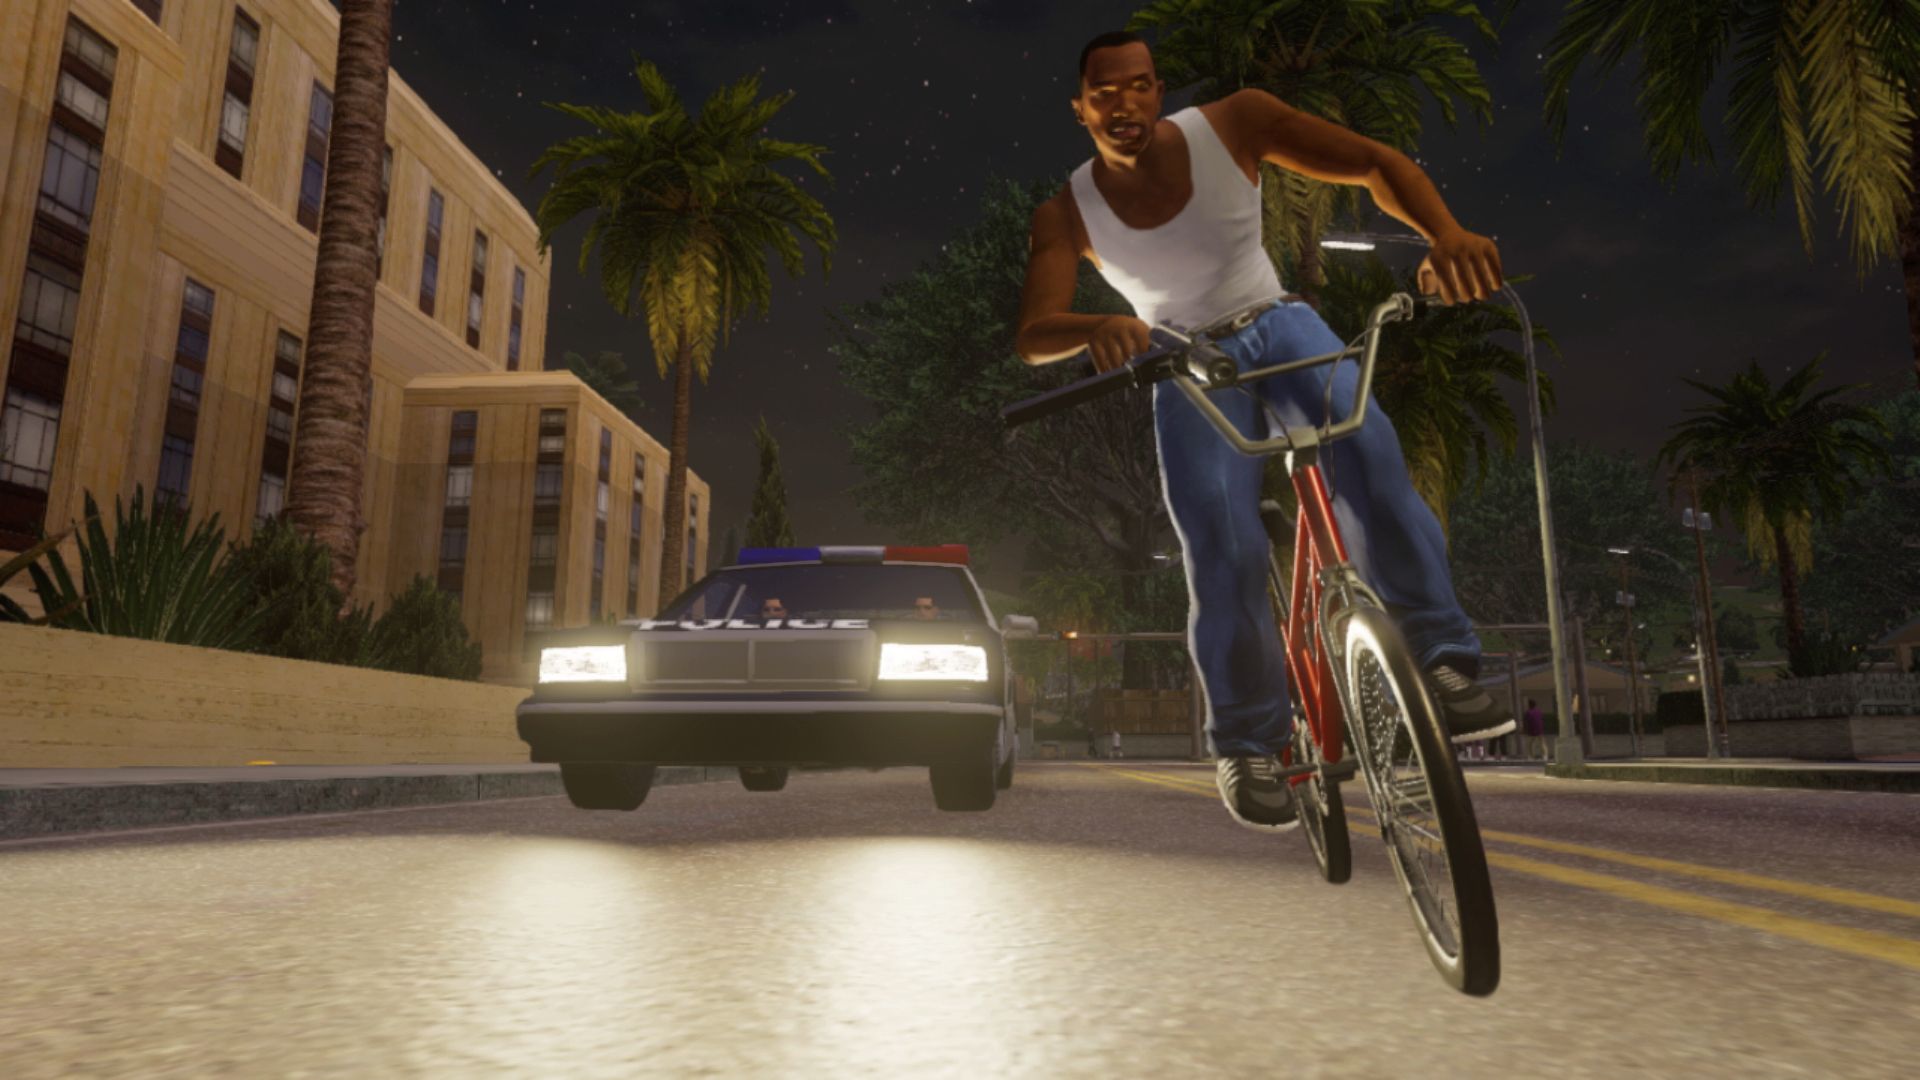 Gta The Trilogy Edition Definitive San Andreas Switch Screen 1 Cca8.jpg